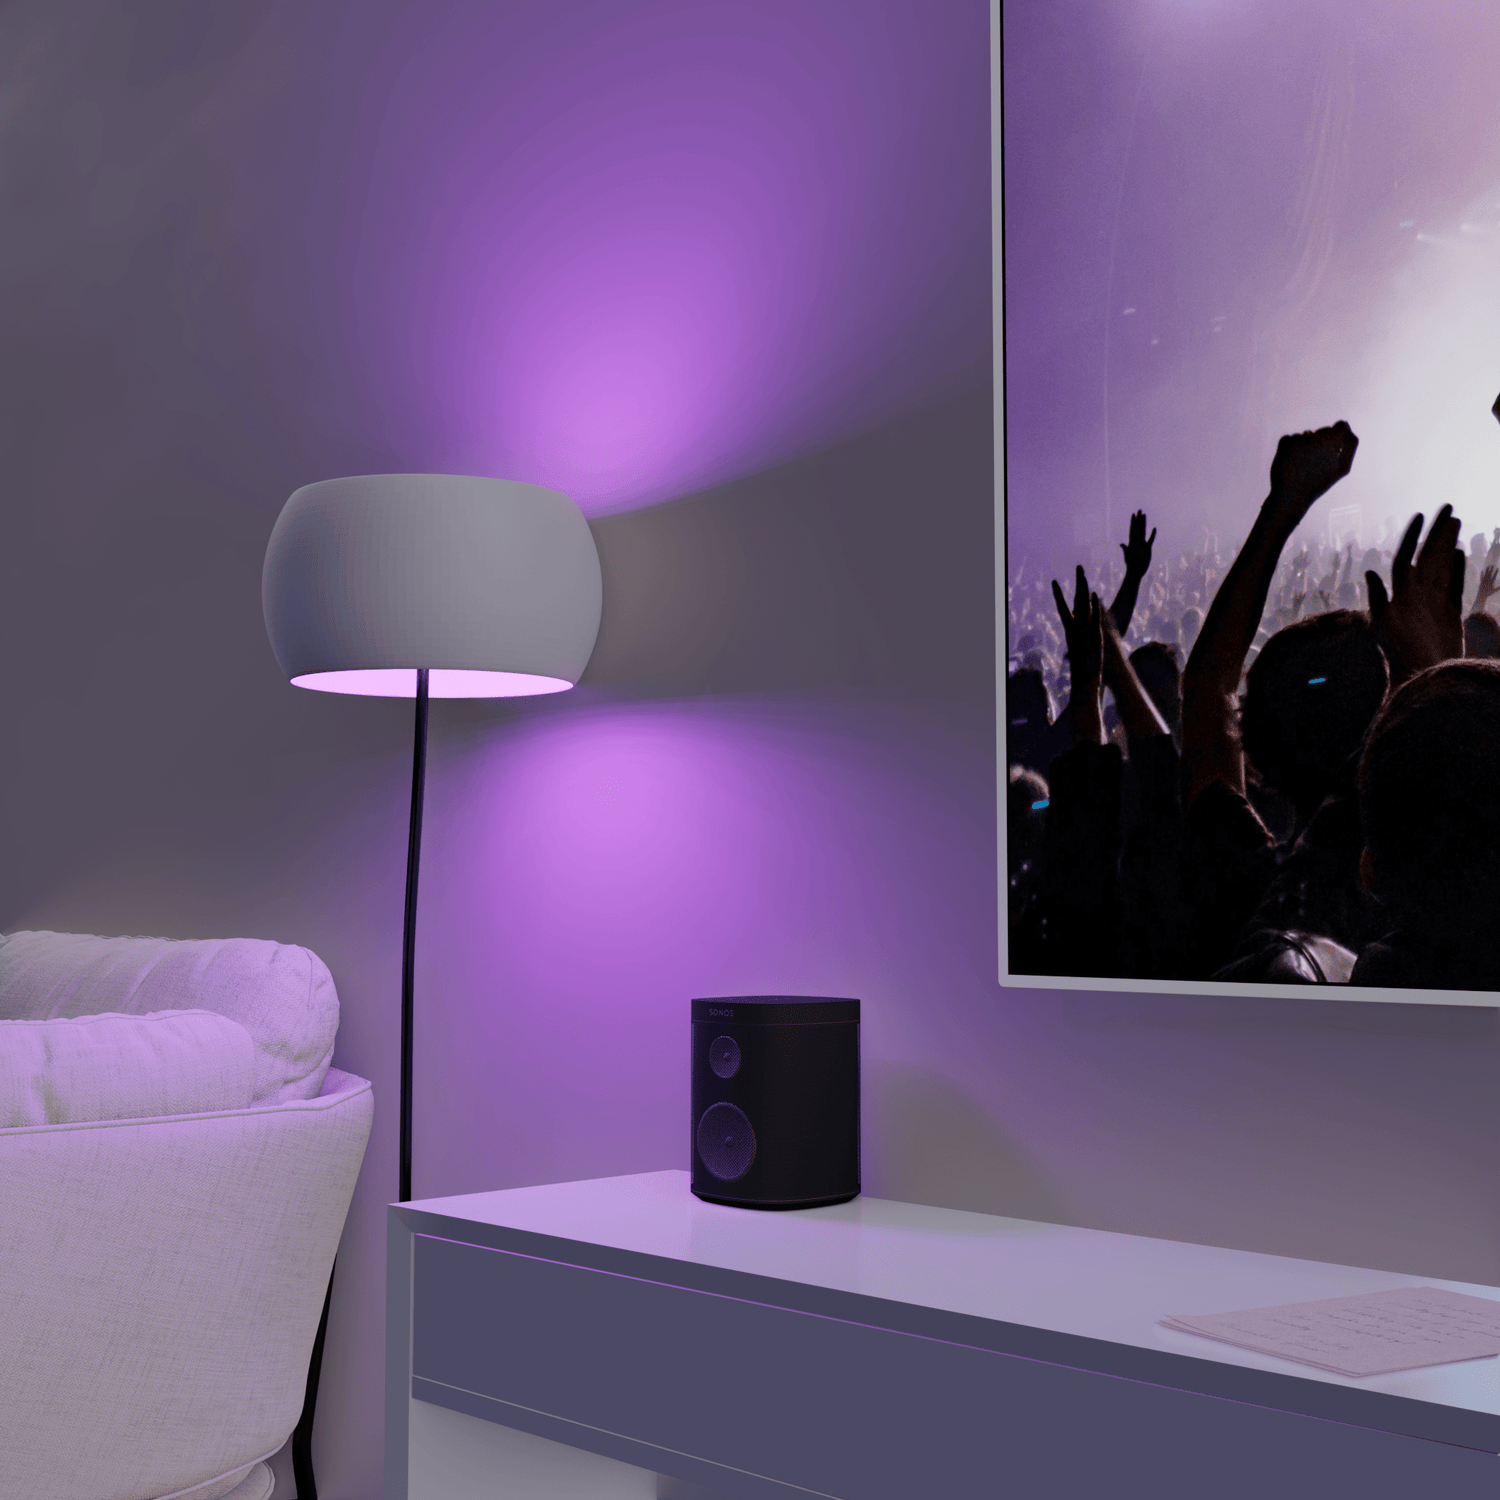 Whim canvases connect with sound and light. Pair hue lights or a bluetooth speaker and experience music and art like never before with the new whim art digital canvas display